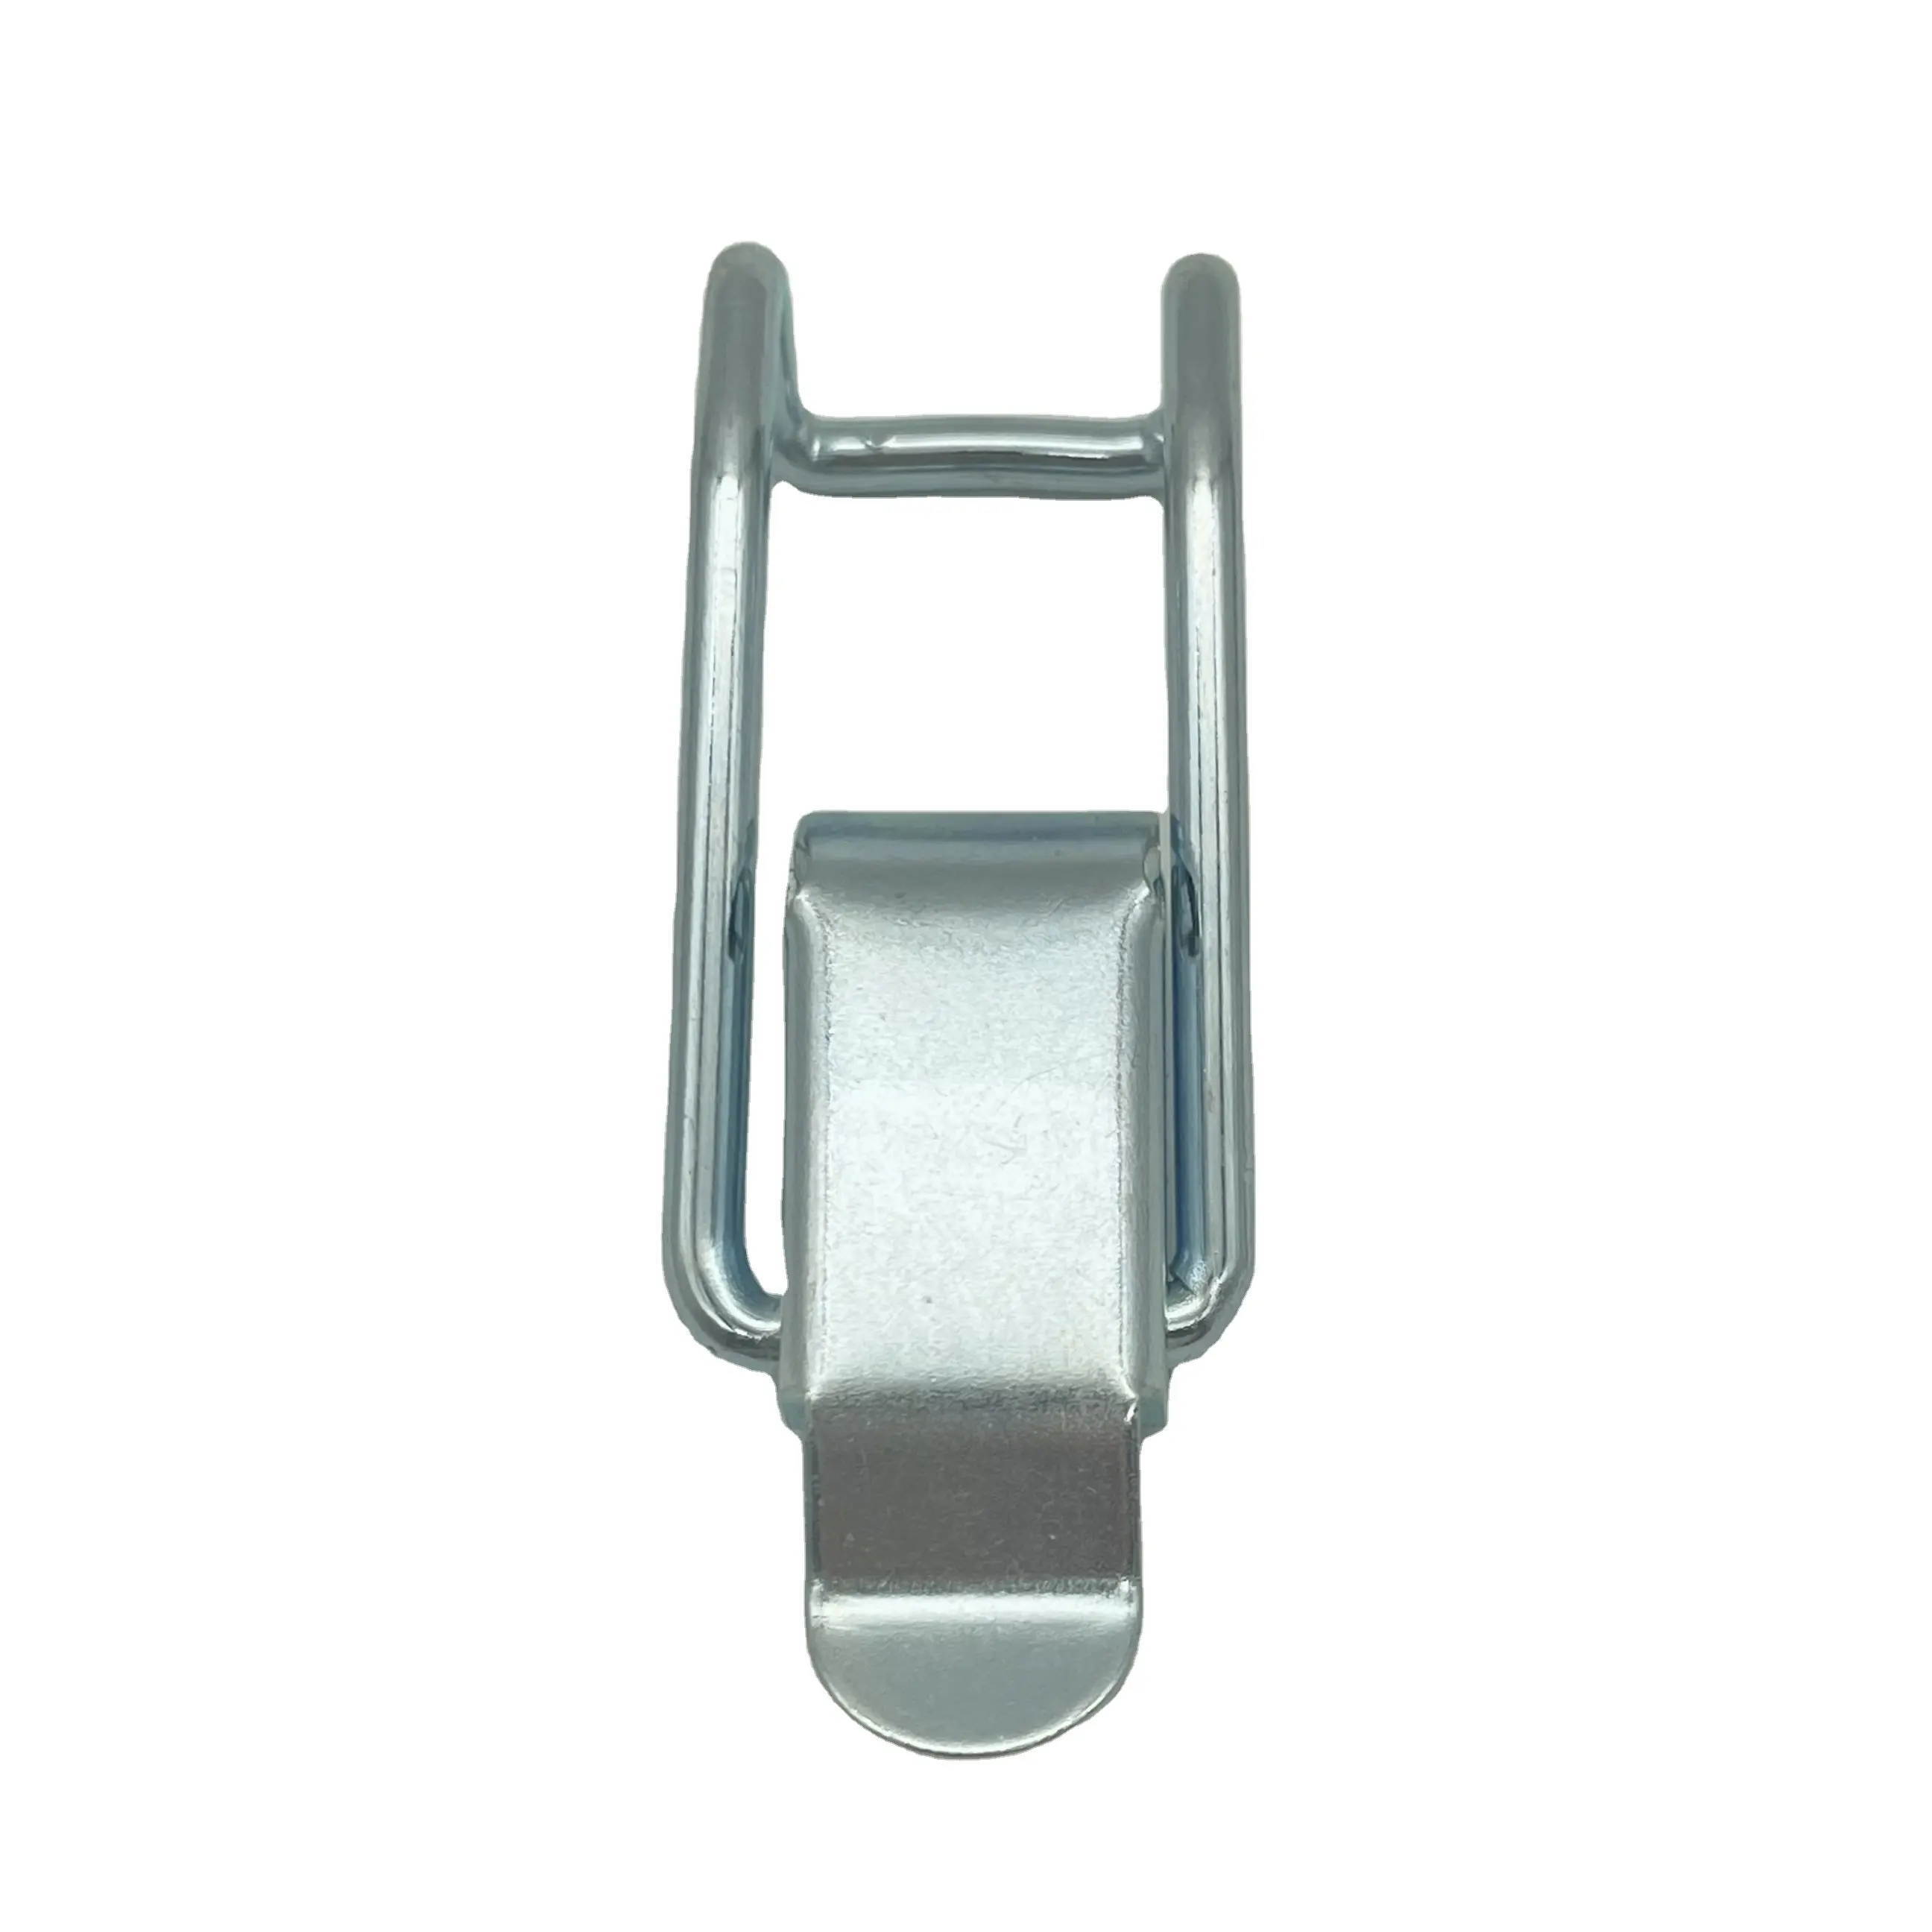 High Quality Durable Stainless Steel Paddle Adjustable Latch Push to Open Latch